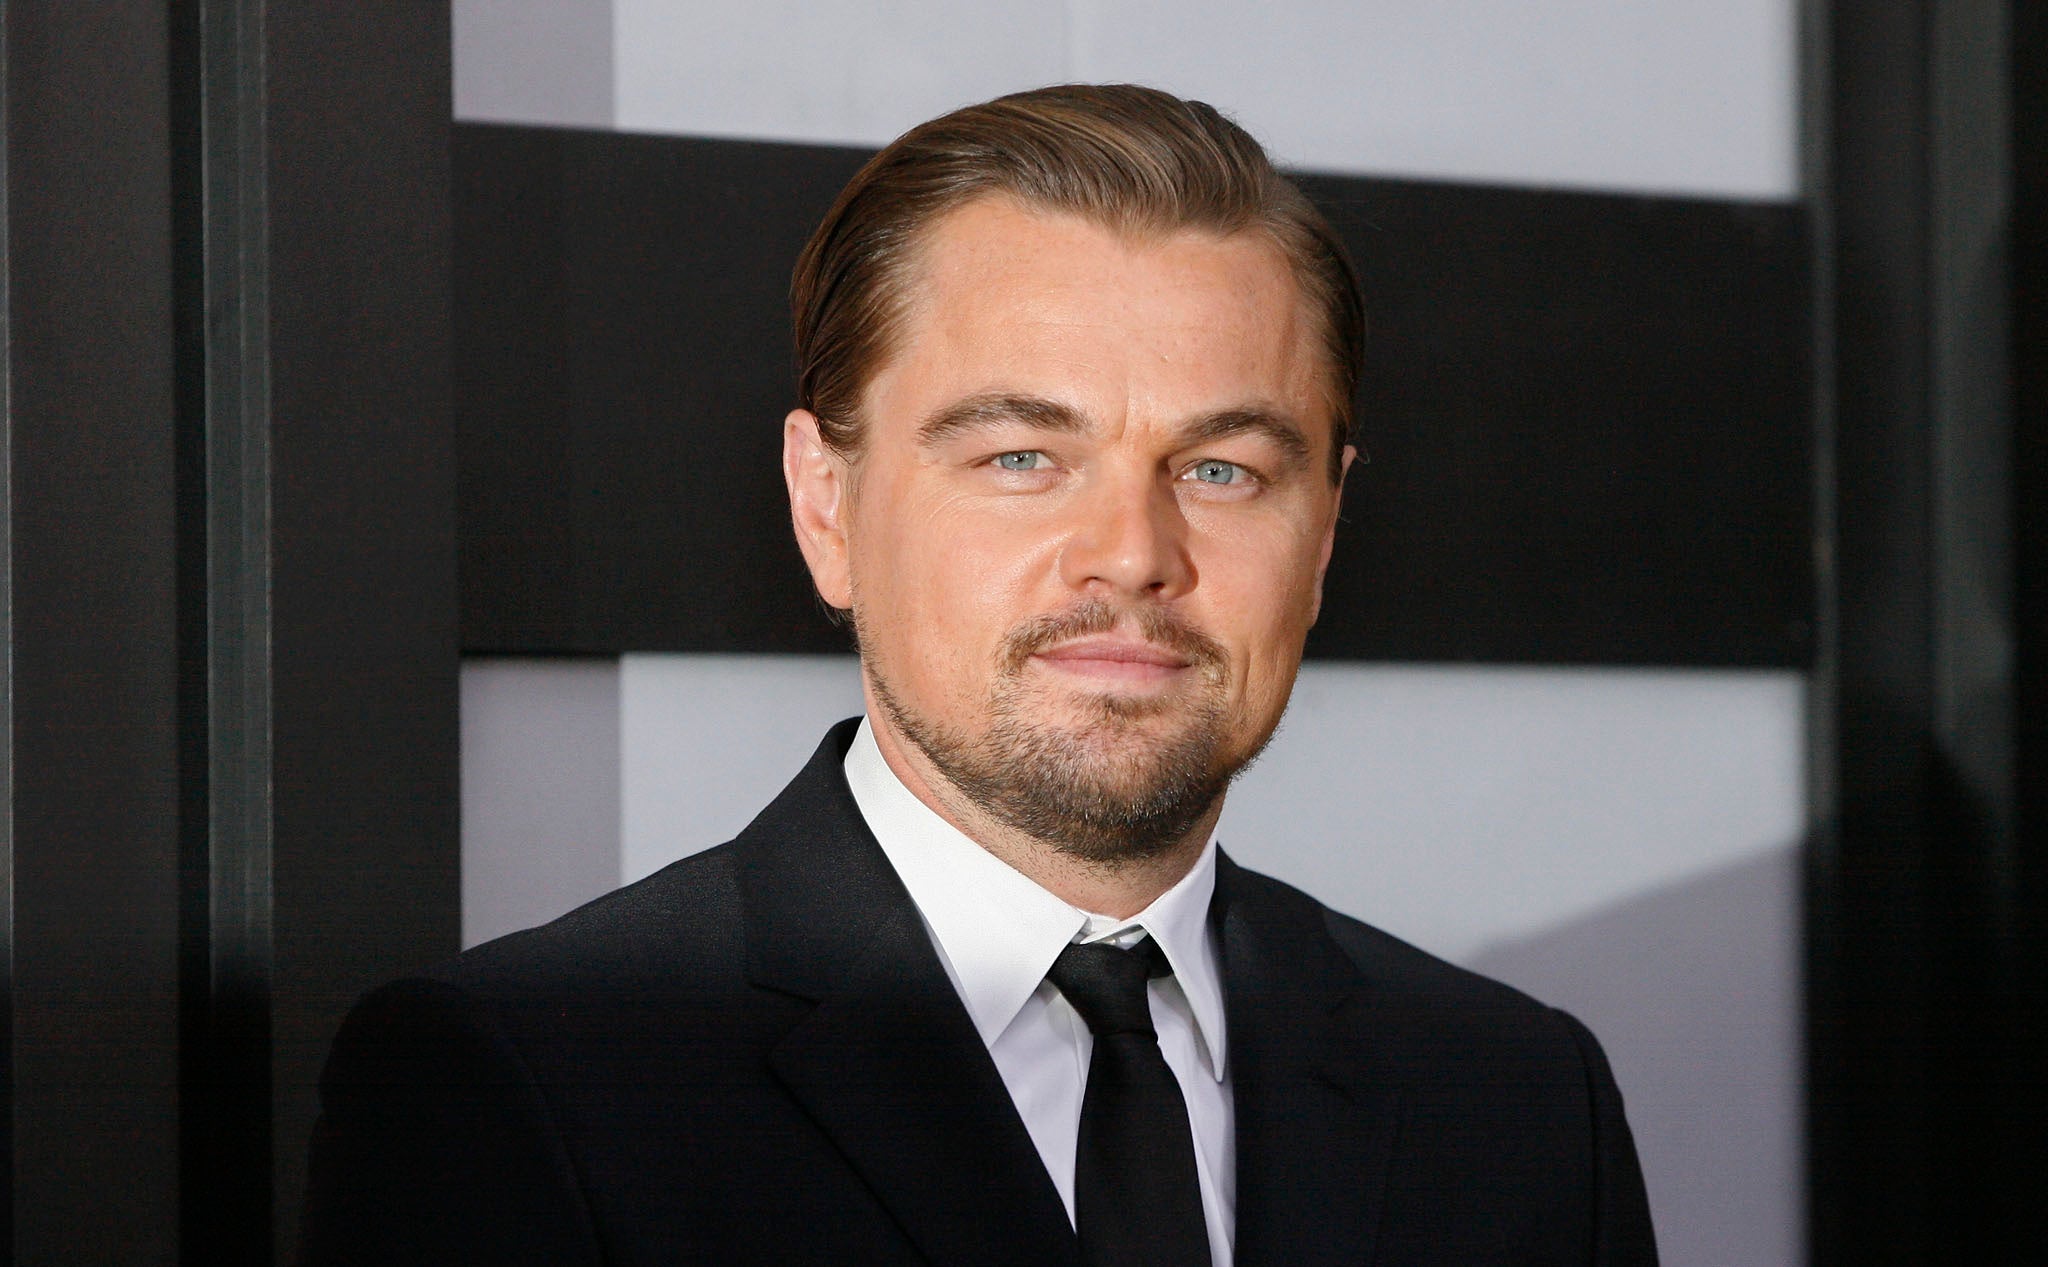 Leonardo DiCaprio said he would never dabble ind rugs after growing up surrounded by substance misuse